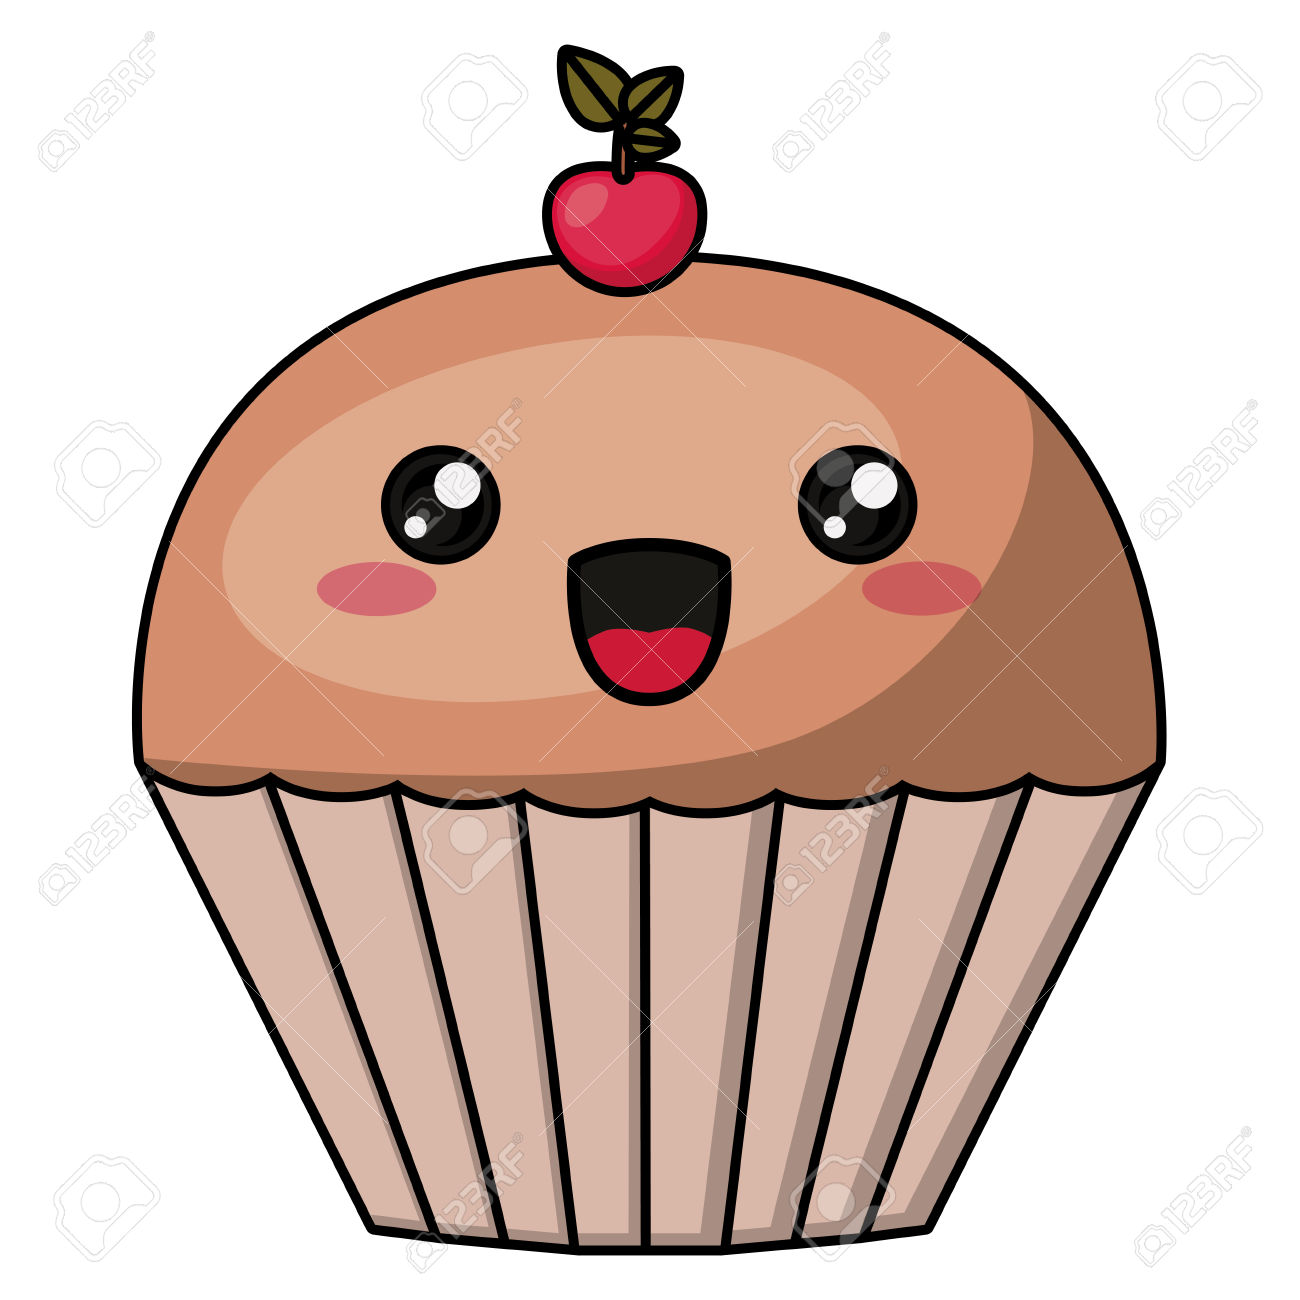 Free download best on. Muffins clipart cute